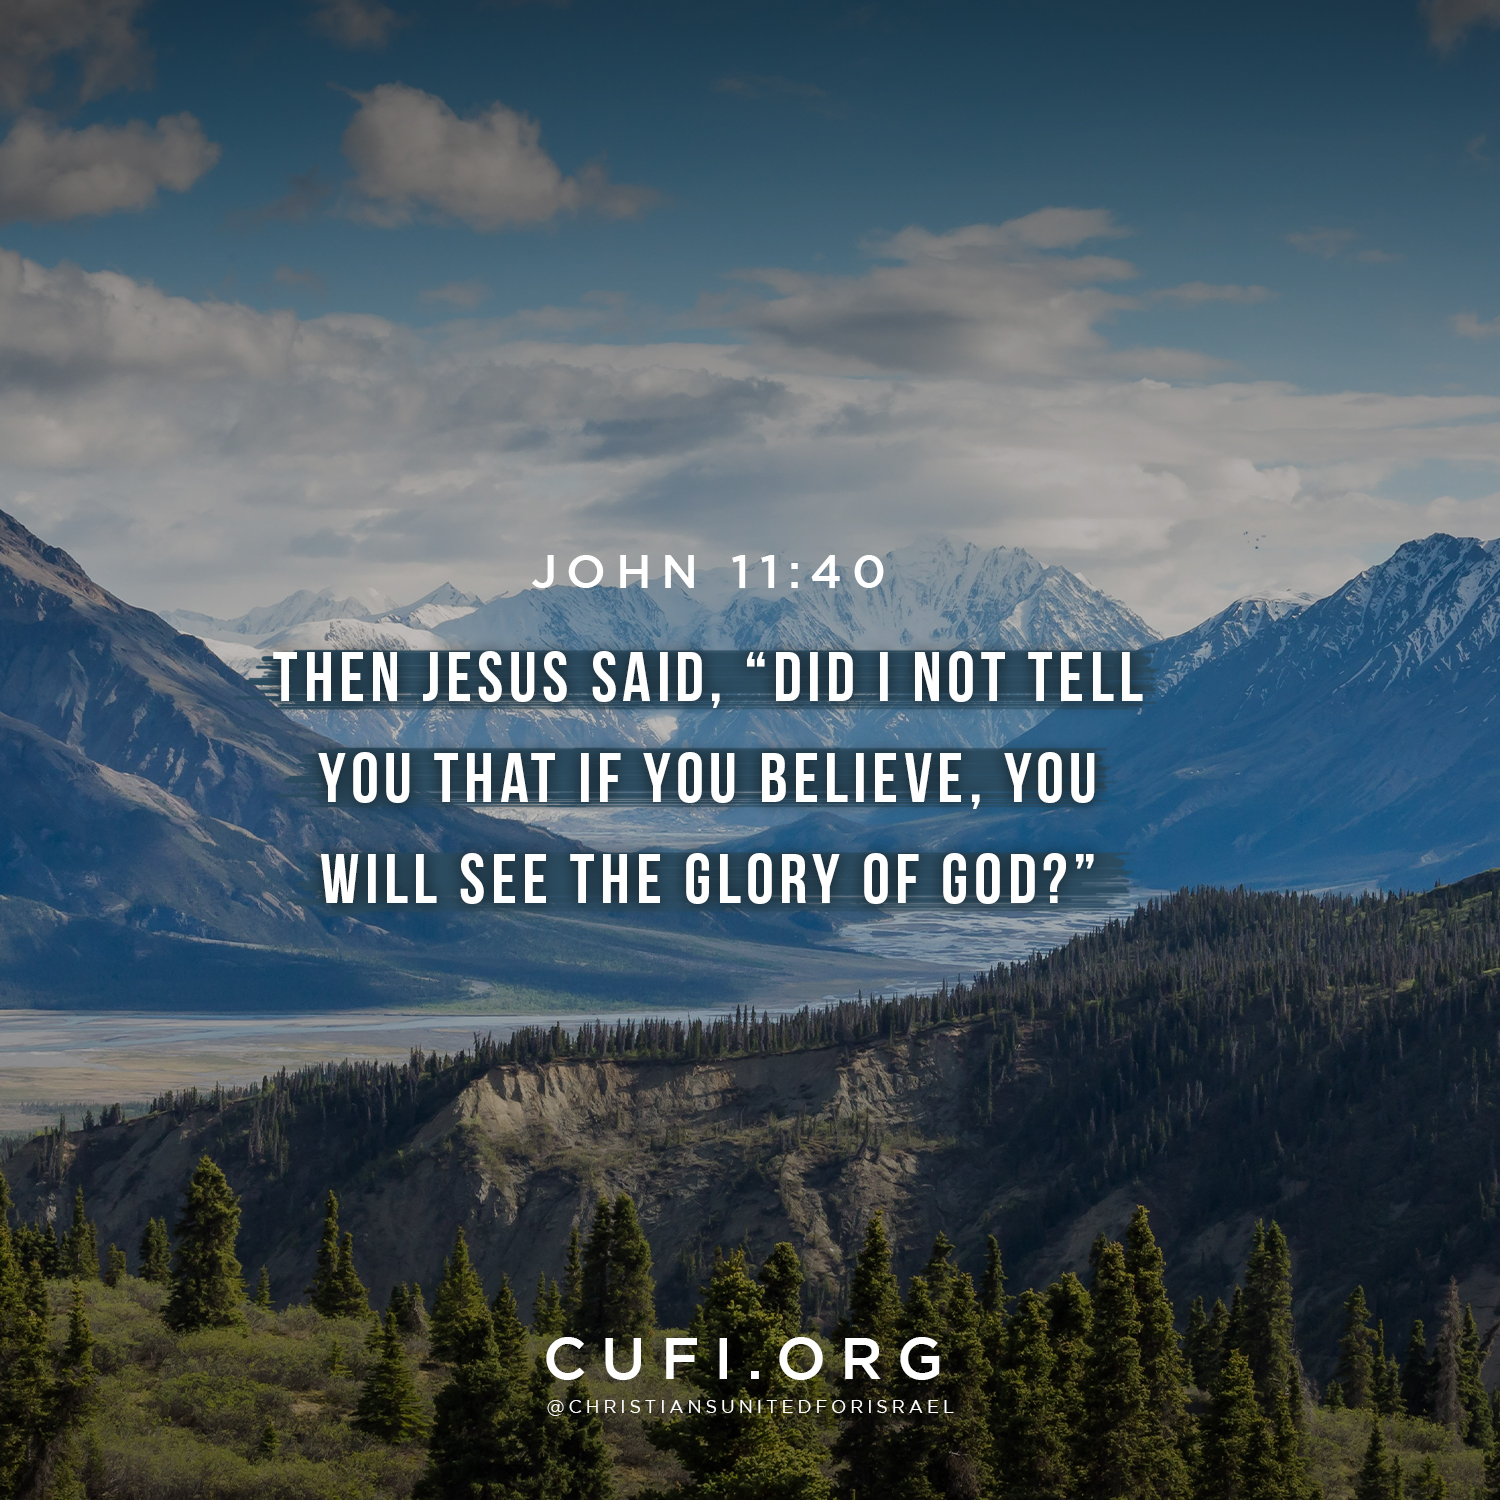 'JOHN 11:40 THEN JESUS SAID, "DIDINOTTELL YOU THAT IF YOU BELIEVE, YOU WILL SEE THE GLORY OF GOD?" CUFI.ORG @CHRIS NSUNITE DFORISRAEL DFOR'